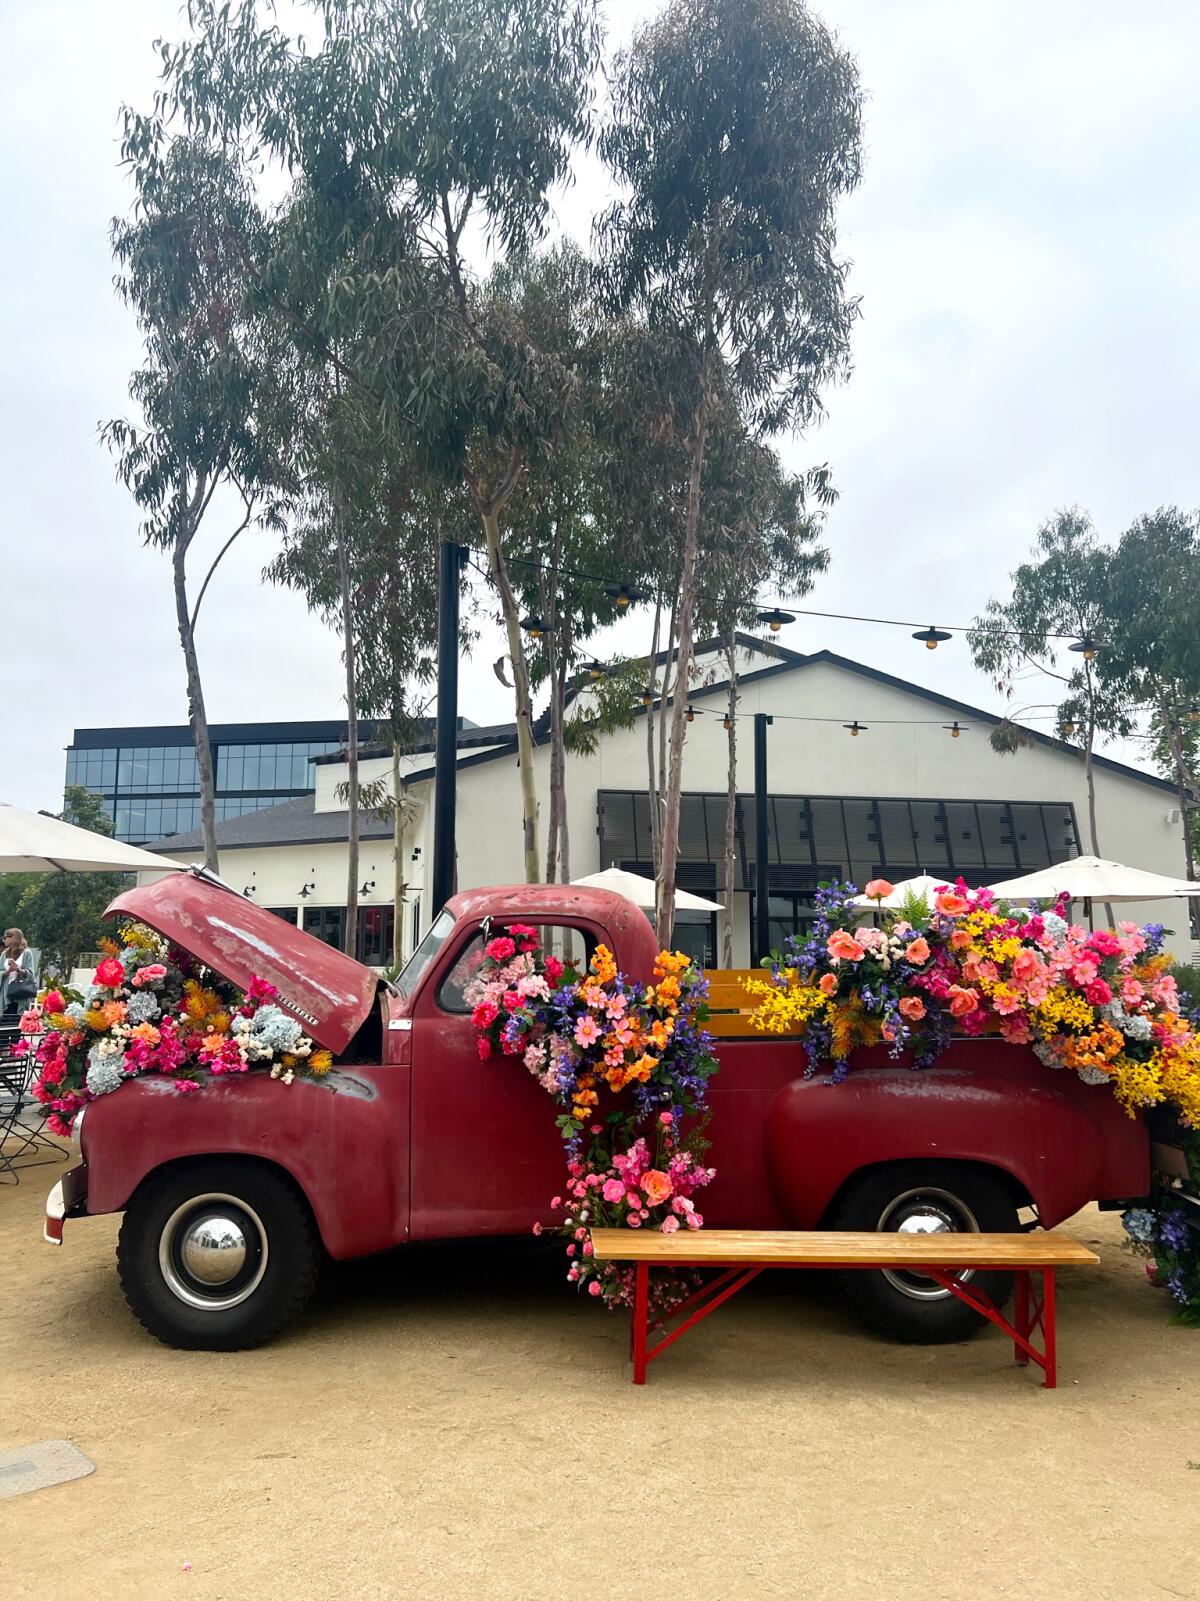 The floral pop-up in One Paseo's Studebaker truck.